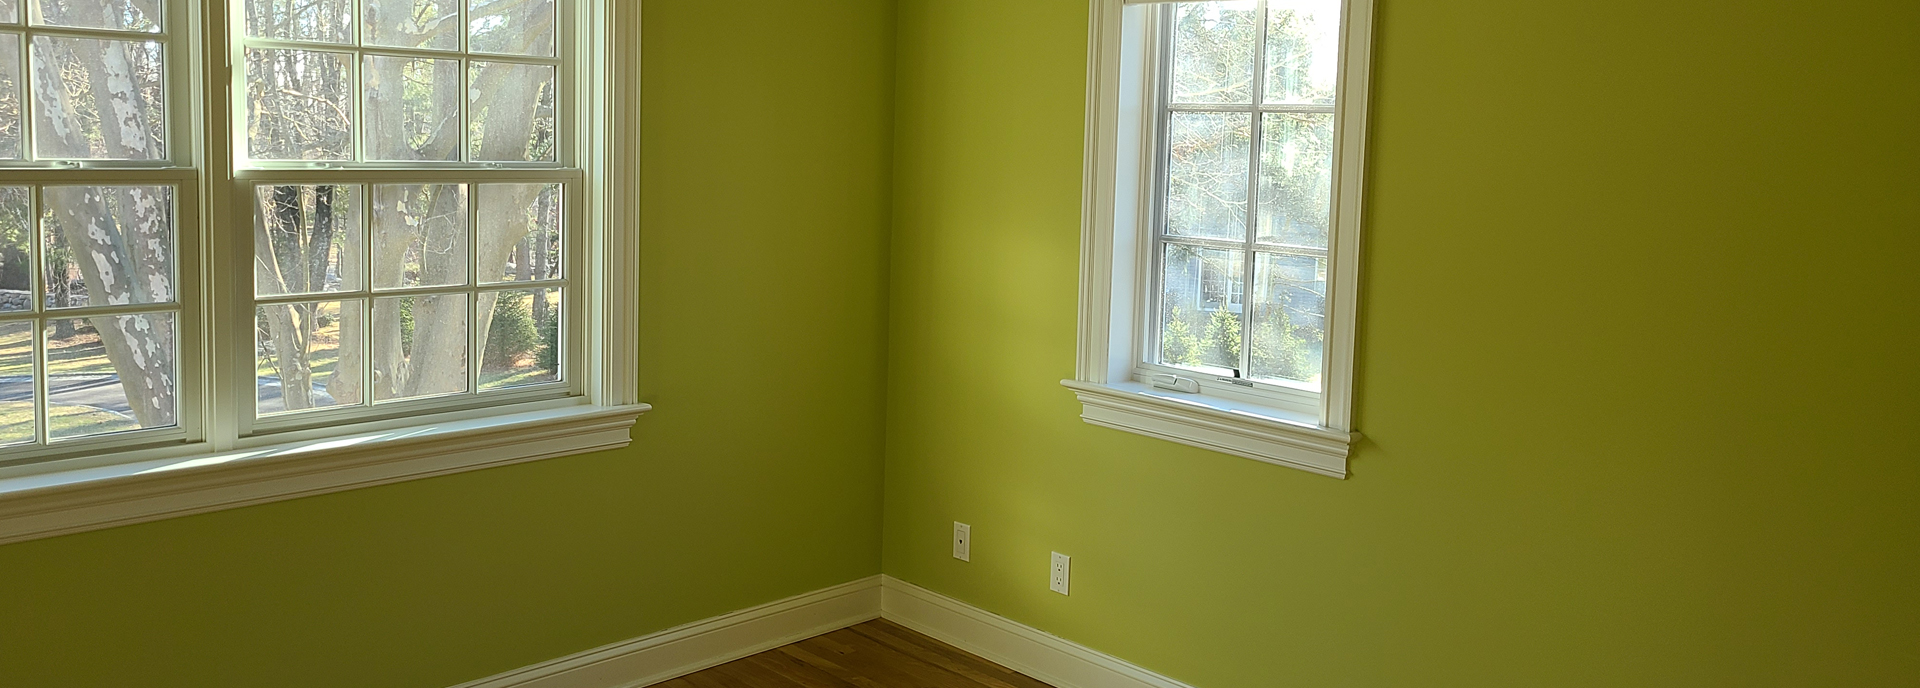 Professional bedroom interior painting Before